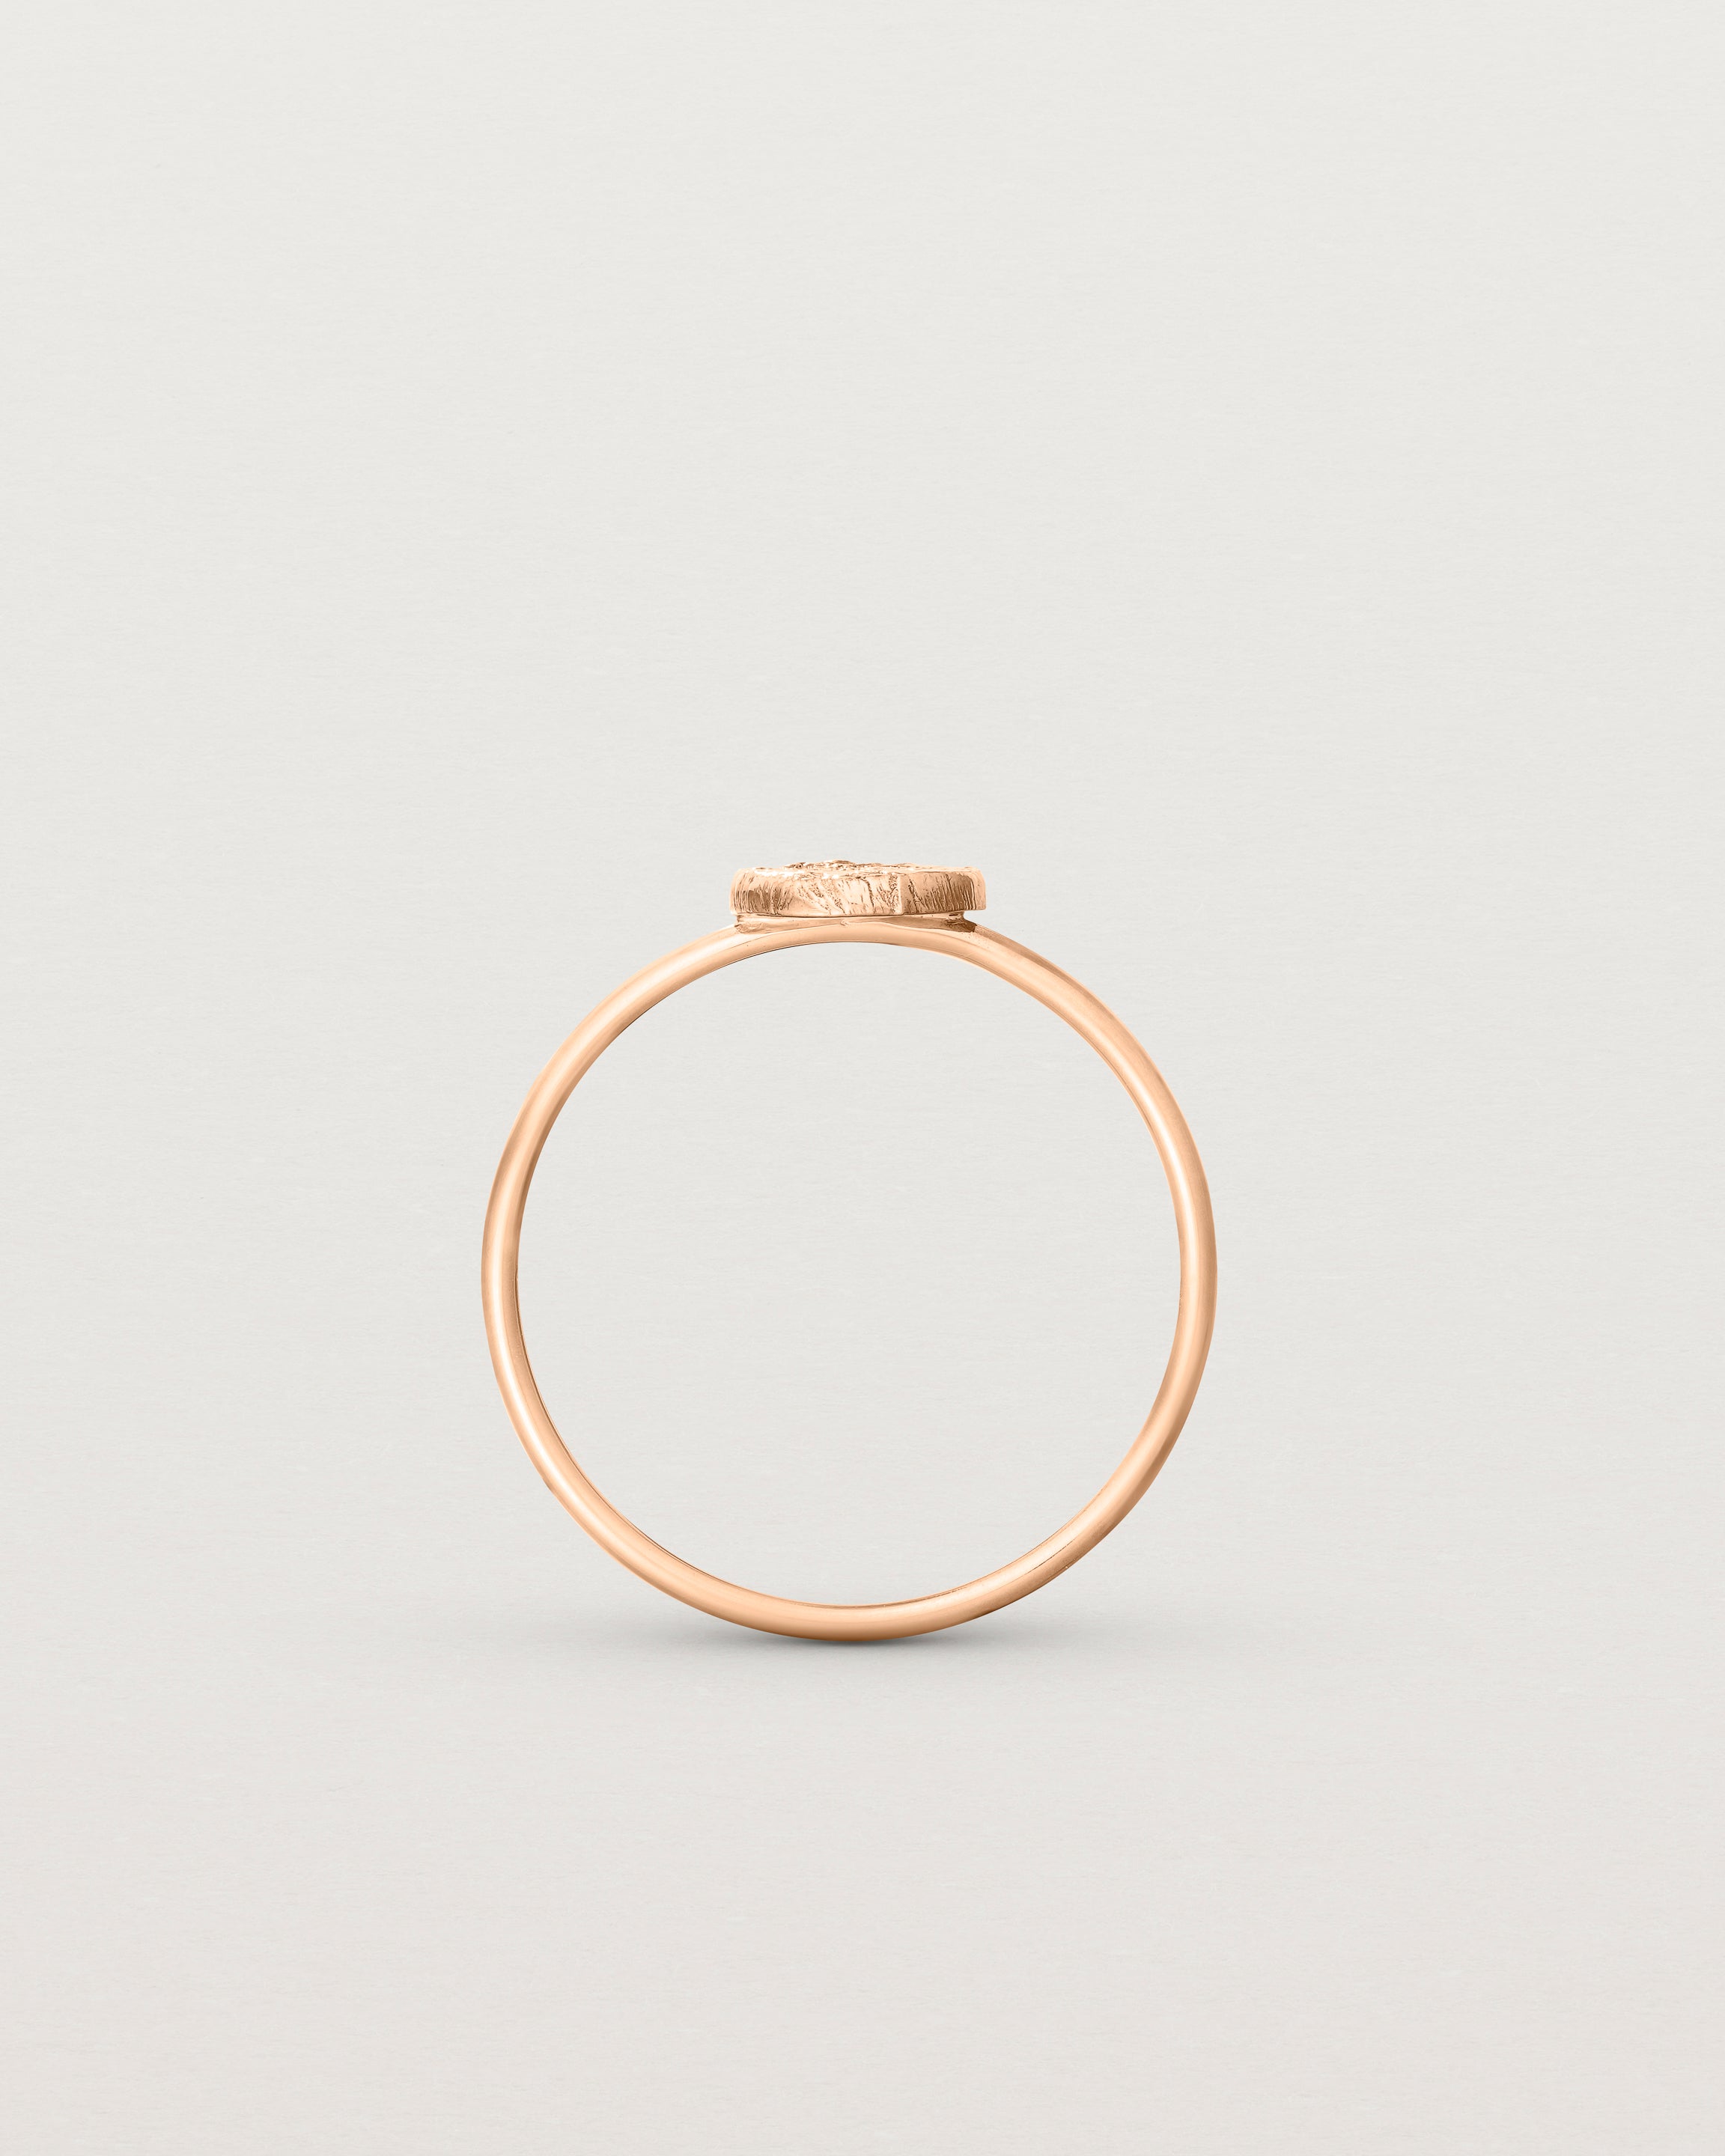 Standing view of the Moon Ring in rose gold.